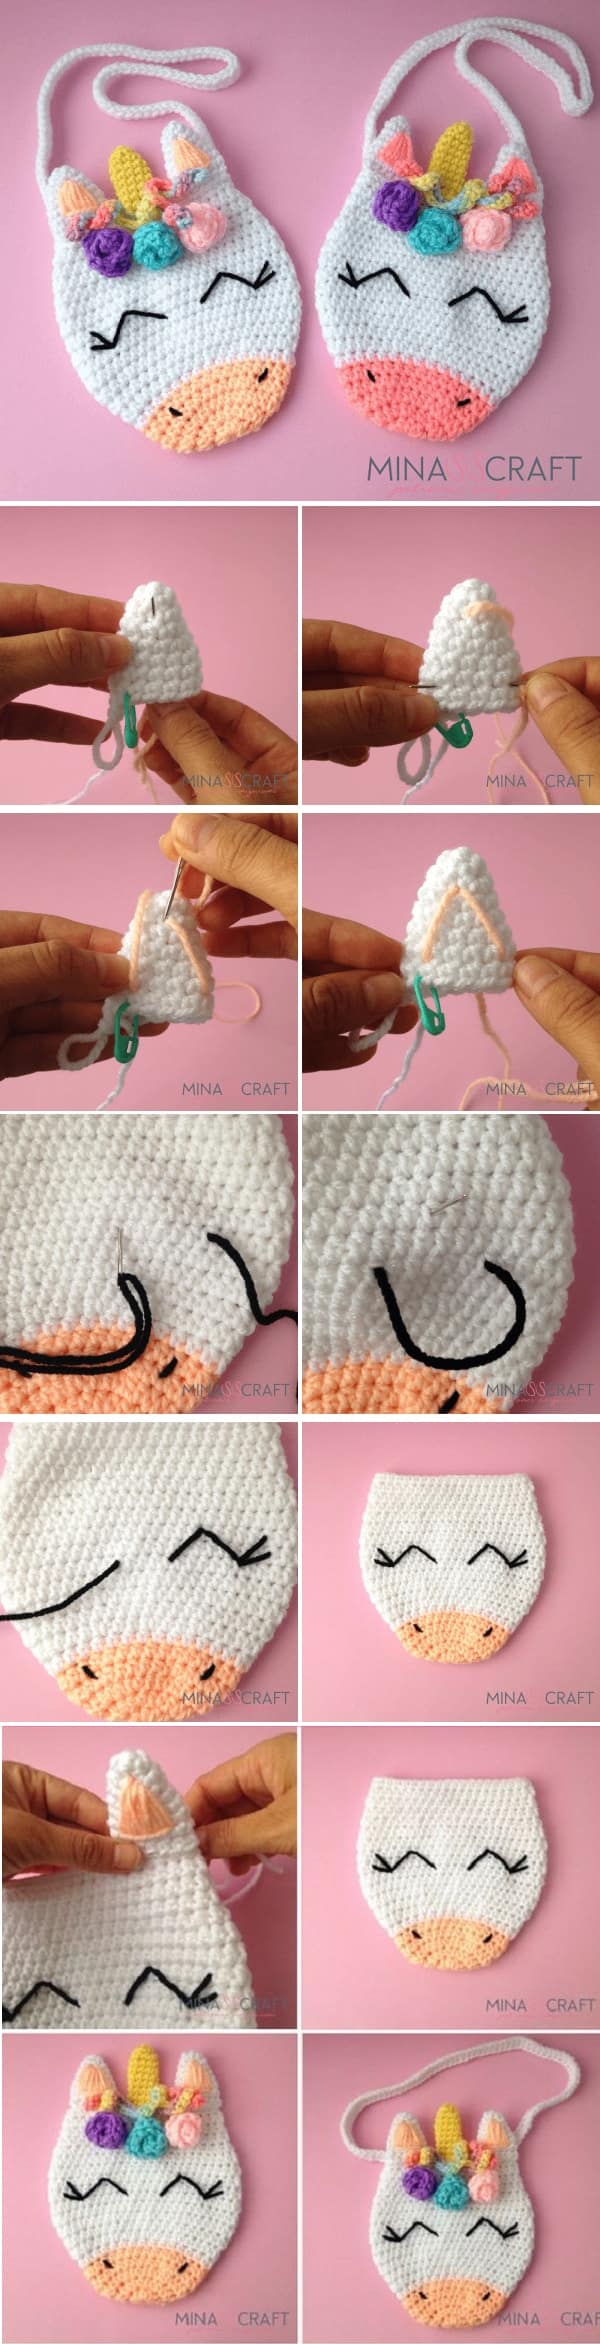 This Unicorn Purse Bag Crochet is a very cute and colorful purse bag that little girls are sure to enjoy.